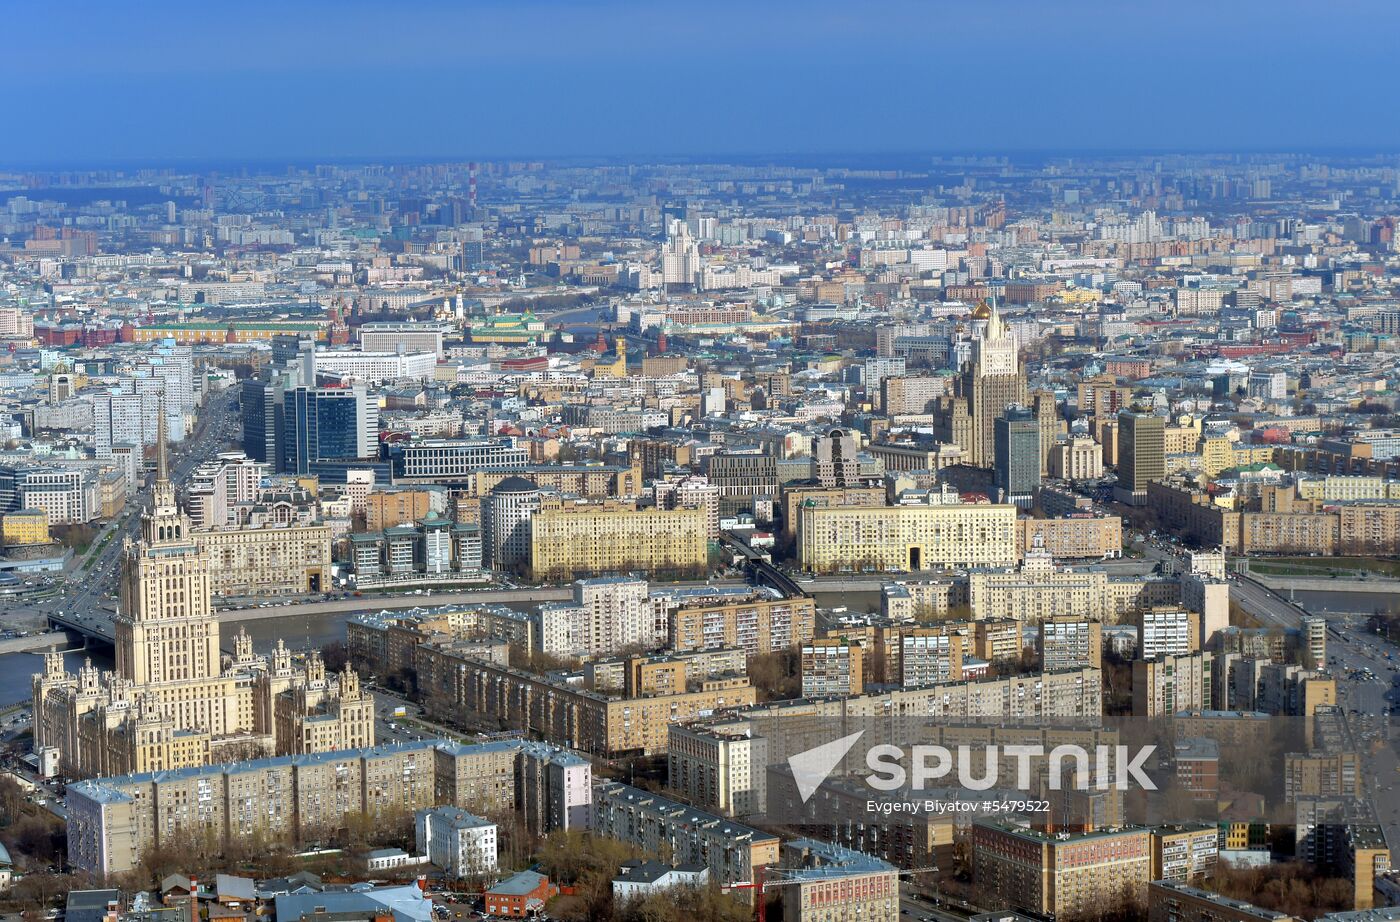 Europe's highest viewing platform opens in Moscow